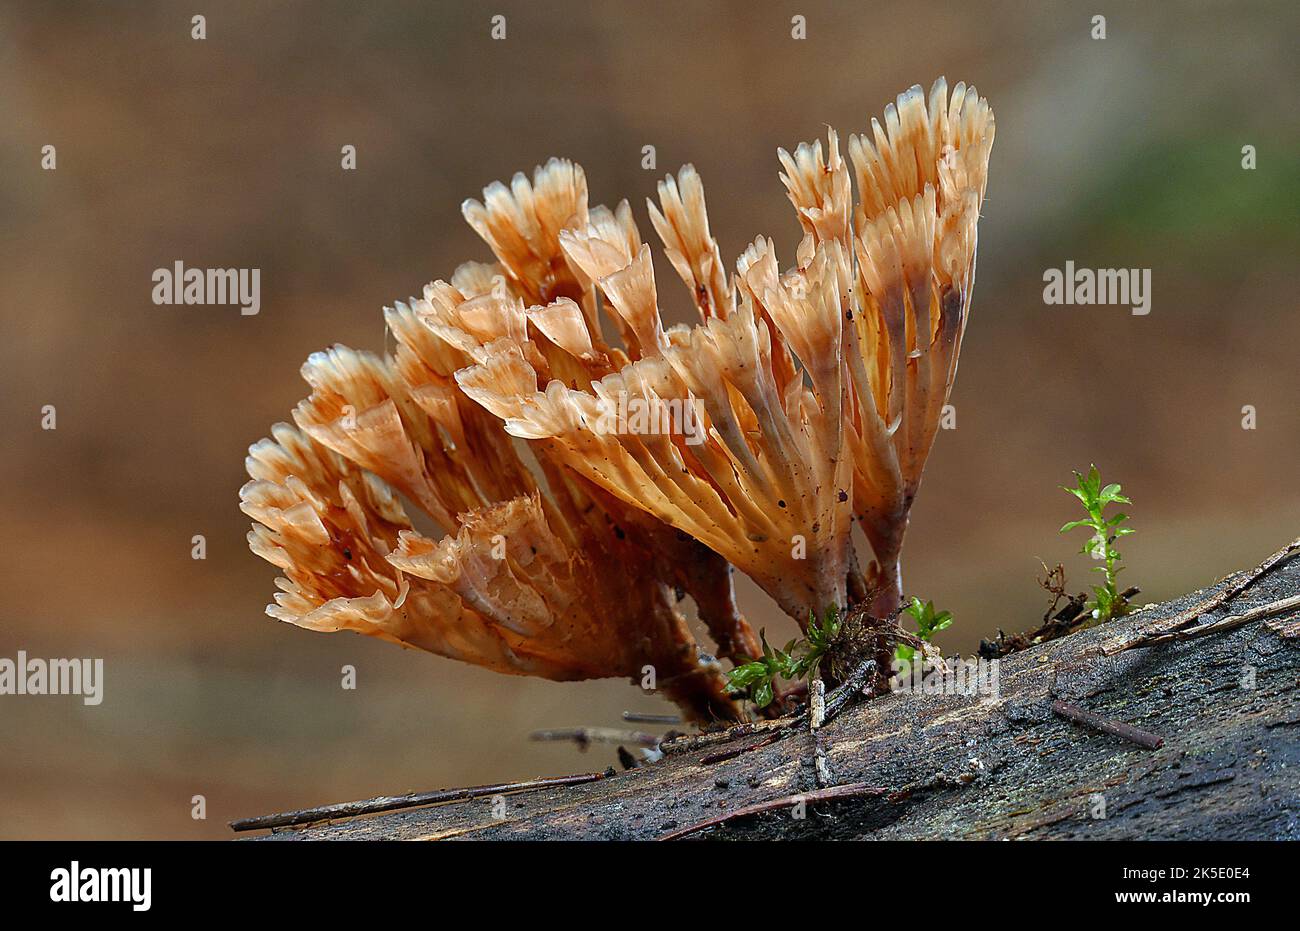 Podoscypha petalodes is a widely distributed species of fungus in the family Meruliaceae. The fungus produces a rosette-like fruit bodies with a shape suggestive of its common names wine glass fungus, and ruffled paper fungus. Credit: BSpragg Stock Photo